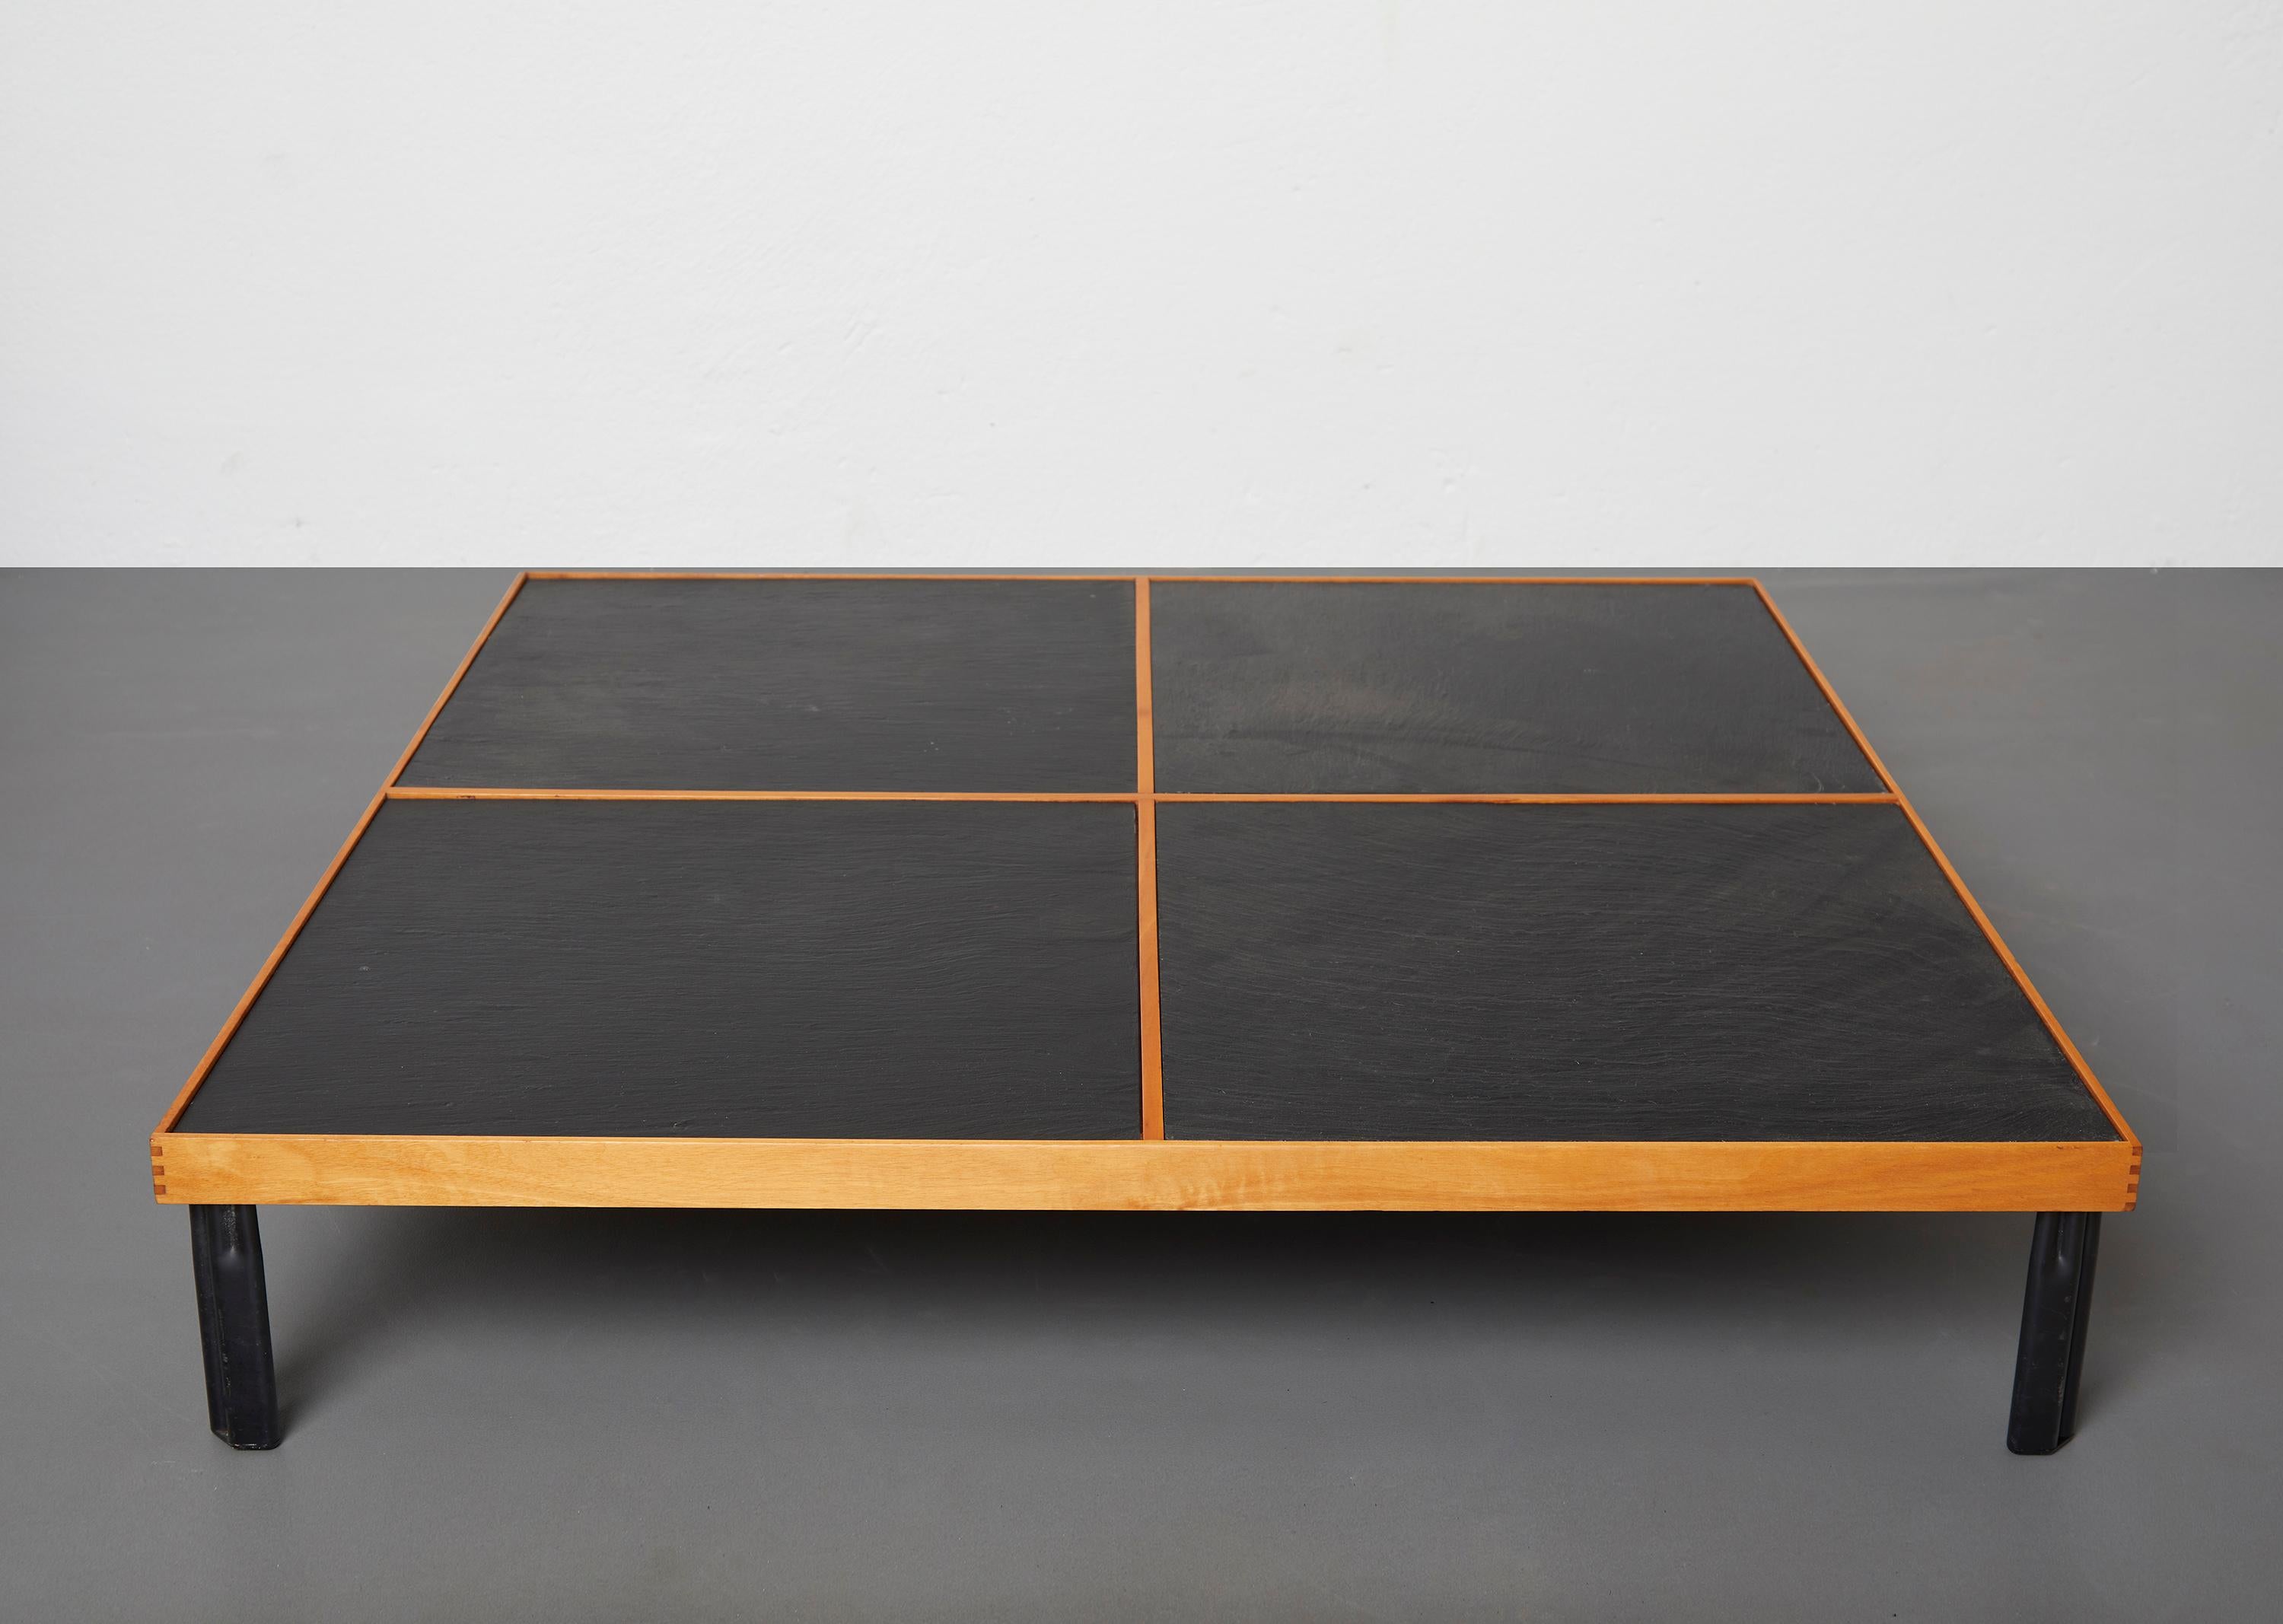 Italian wood and slate coffee table by Piero de Martini, Cassina 1980

Beautiful coffee table by italian architect and designer Piero de Martini from the Naviglio series for Cassina, 1981.

Clearly inspired by japanese culture and aesthetics,